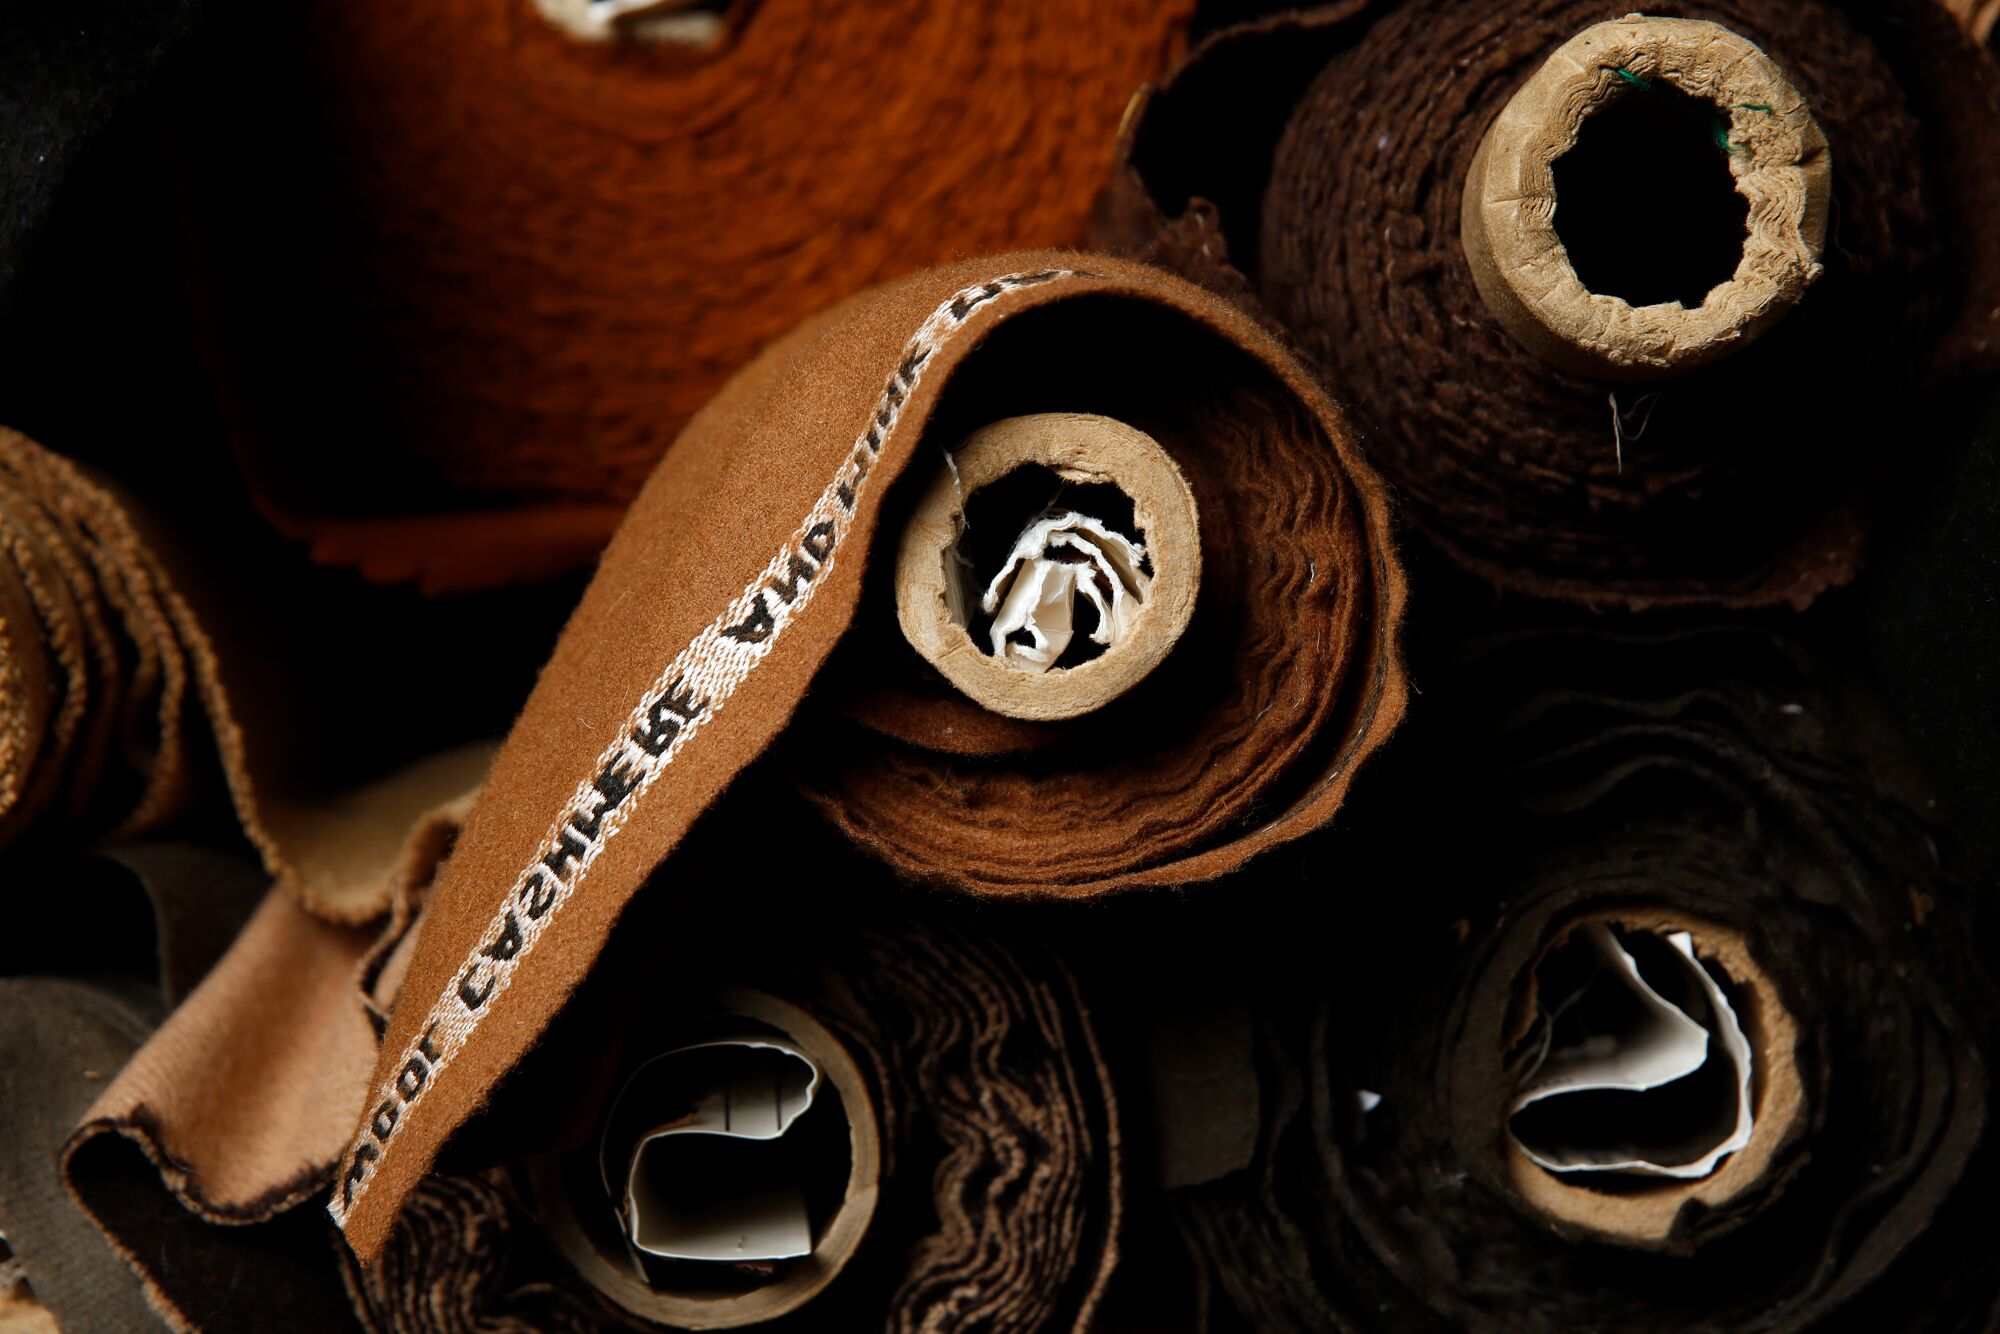 Spools of wool and cashmere fabrics are for sale at at Mood Fabrics. (Photo By Dania Maxwell / Los Angeles Times)